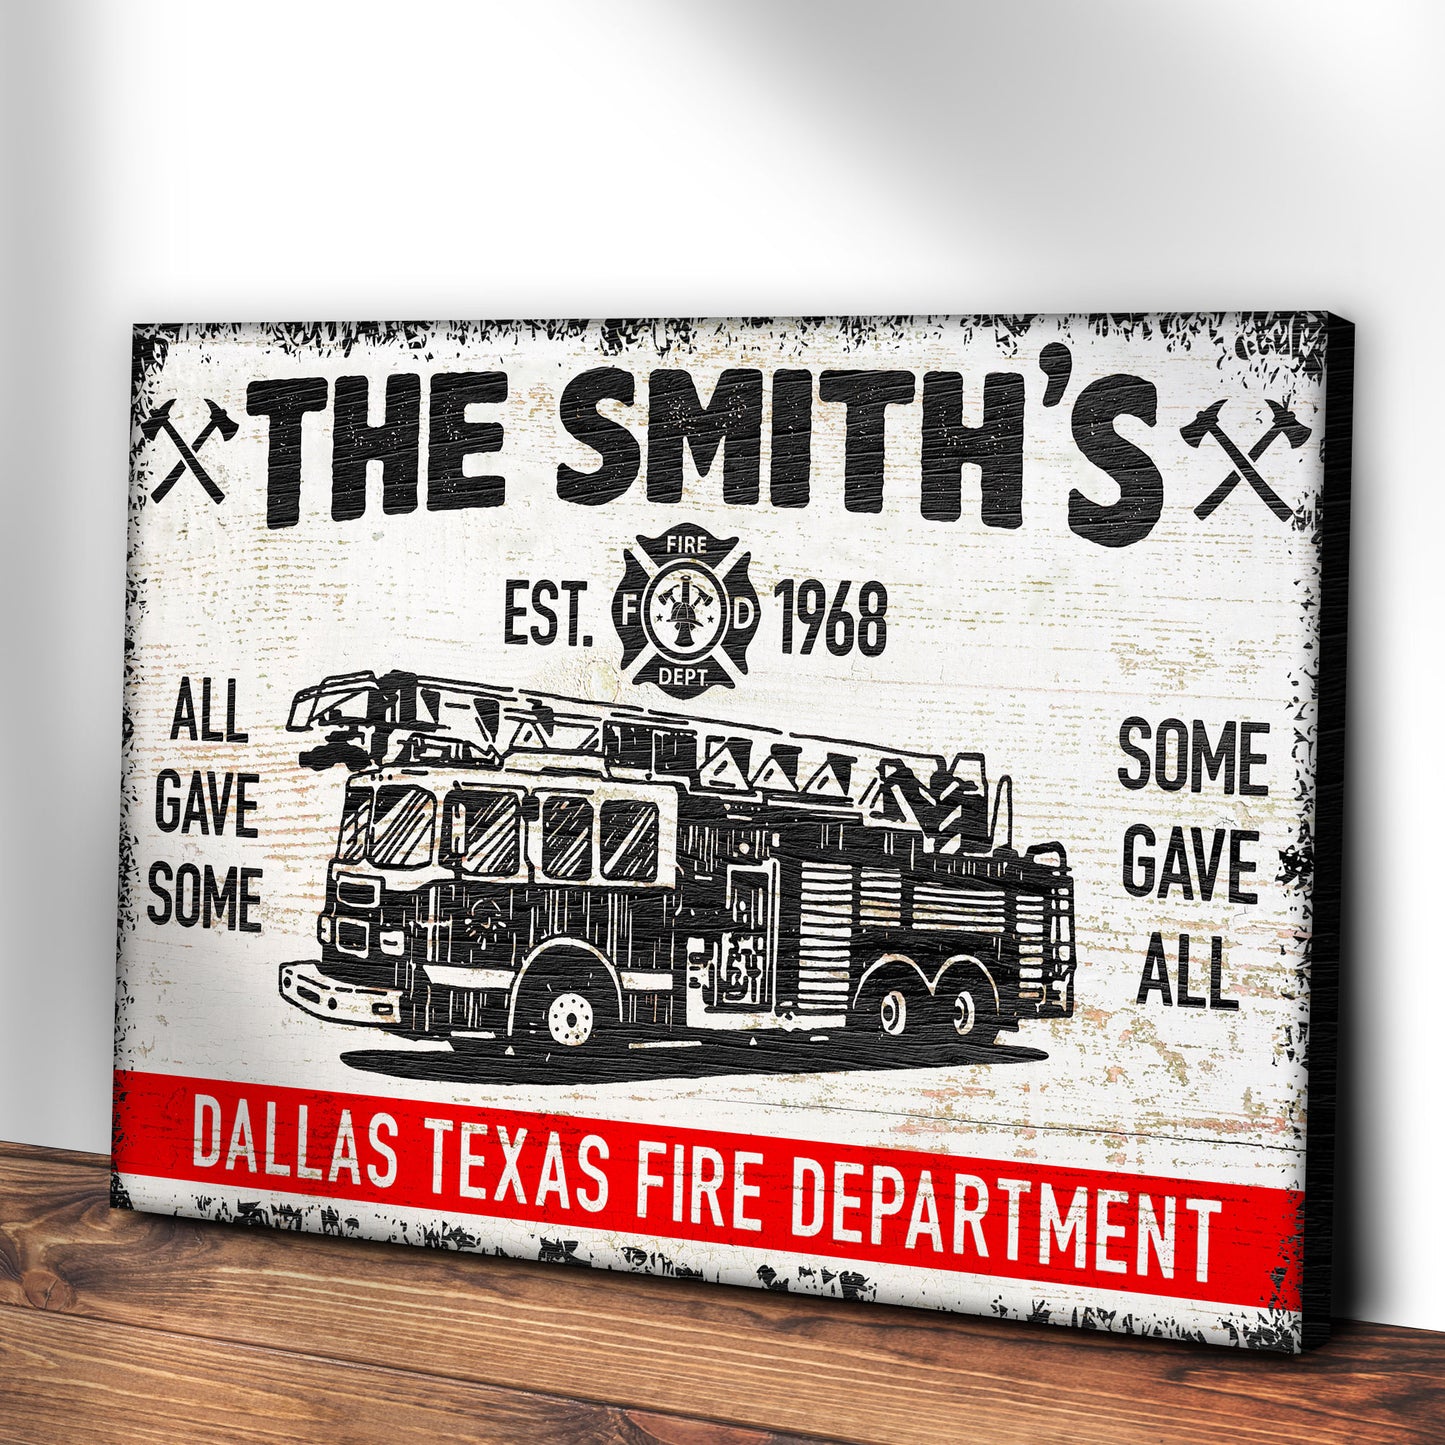 Some Gave All Fire Fighter Sign - Image by Tailored Canvases